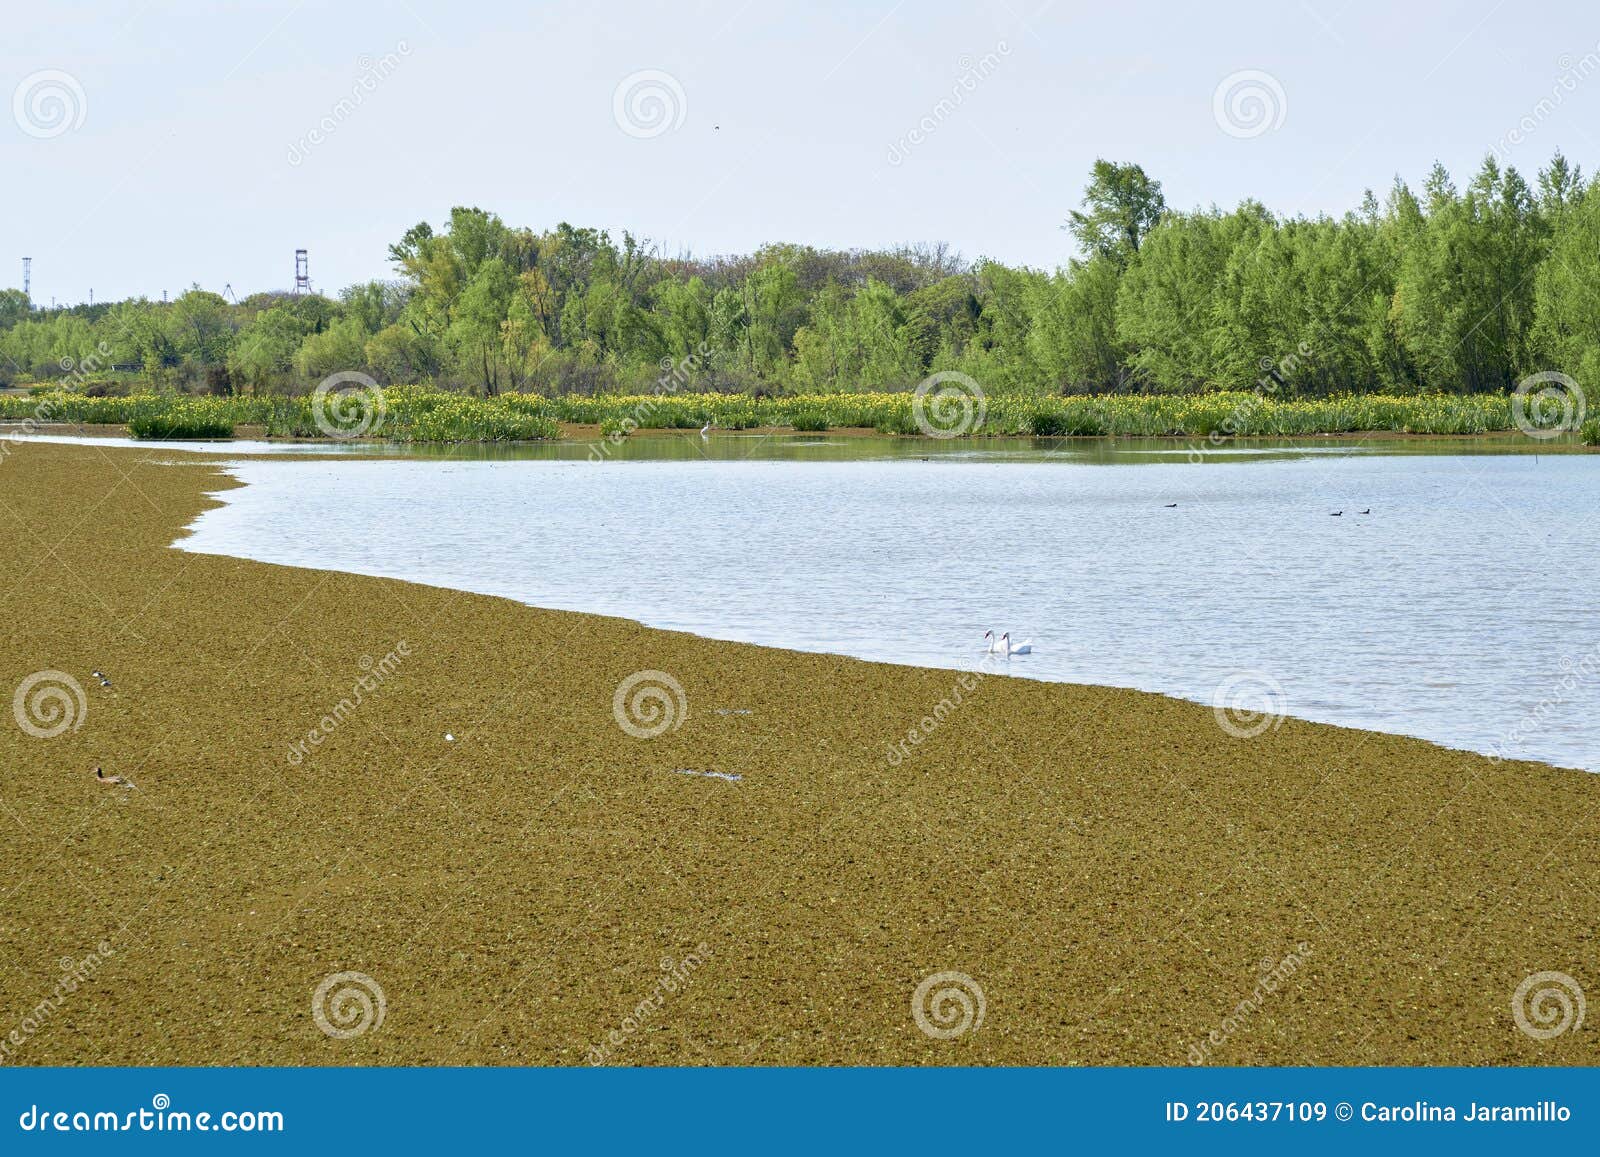 lagoon of the costanera sur ecological reserve, in buenos aires, argentina